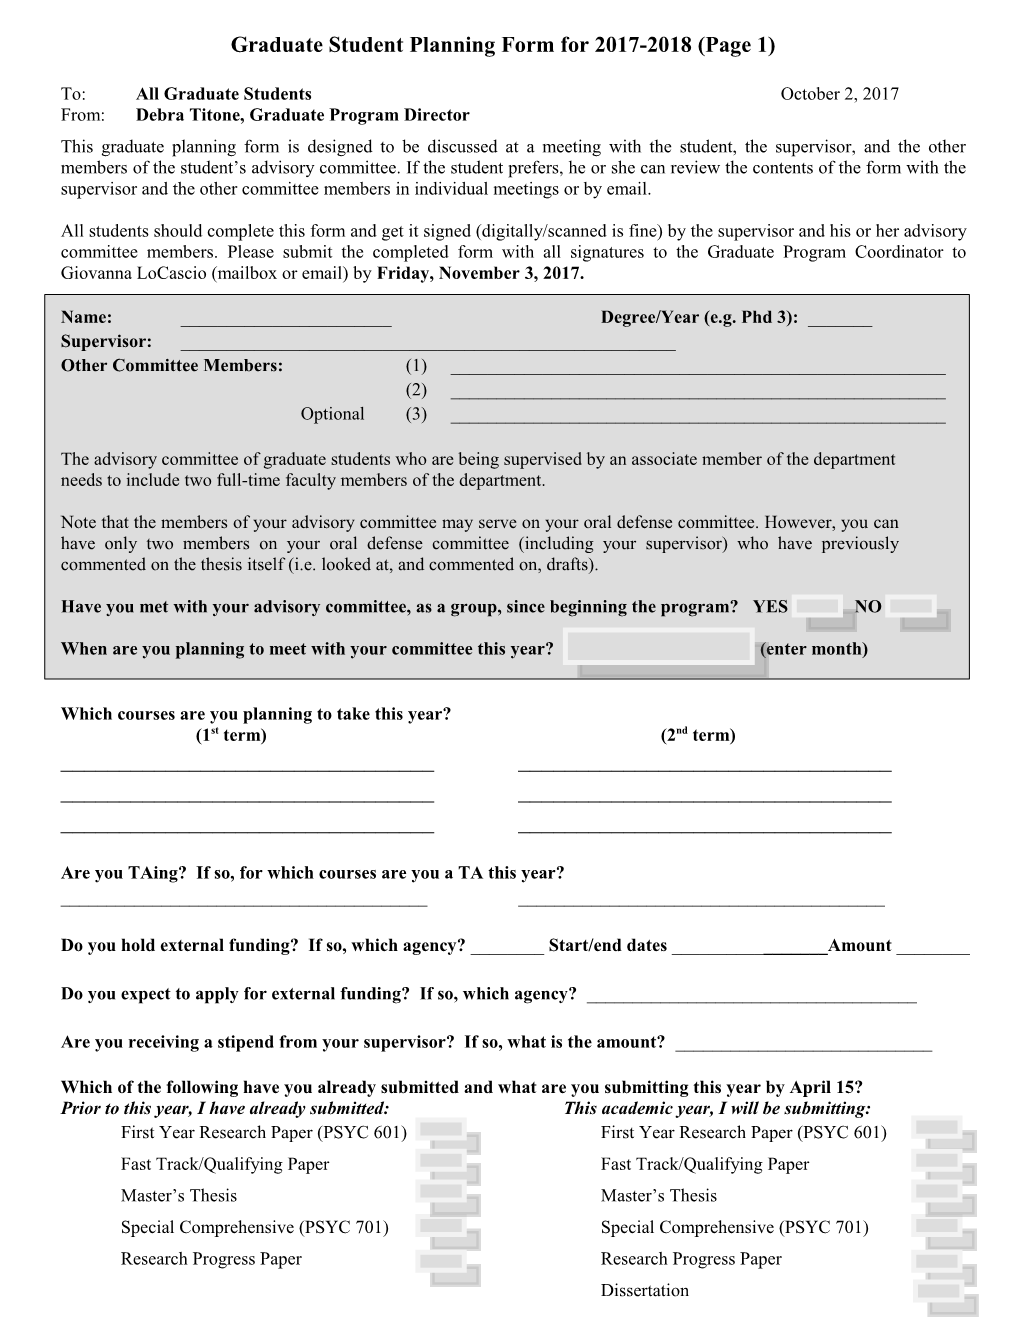 Graduate Student Planning Form for 2010-2011